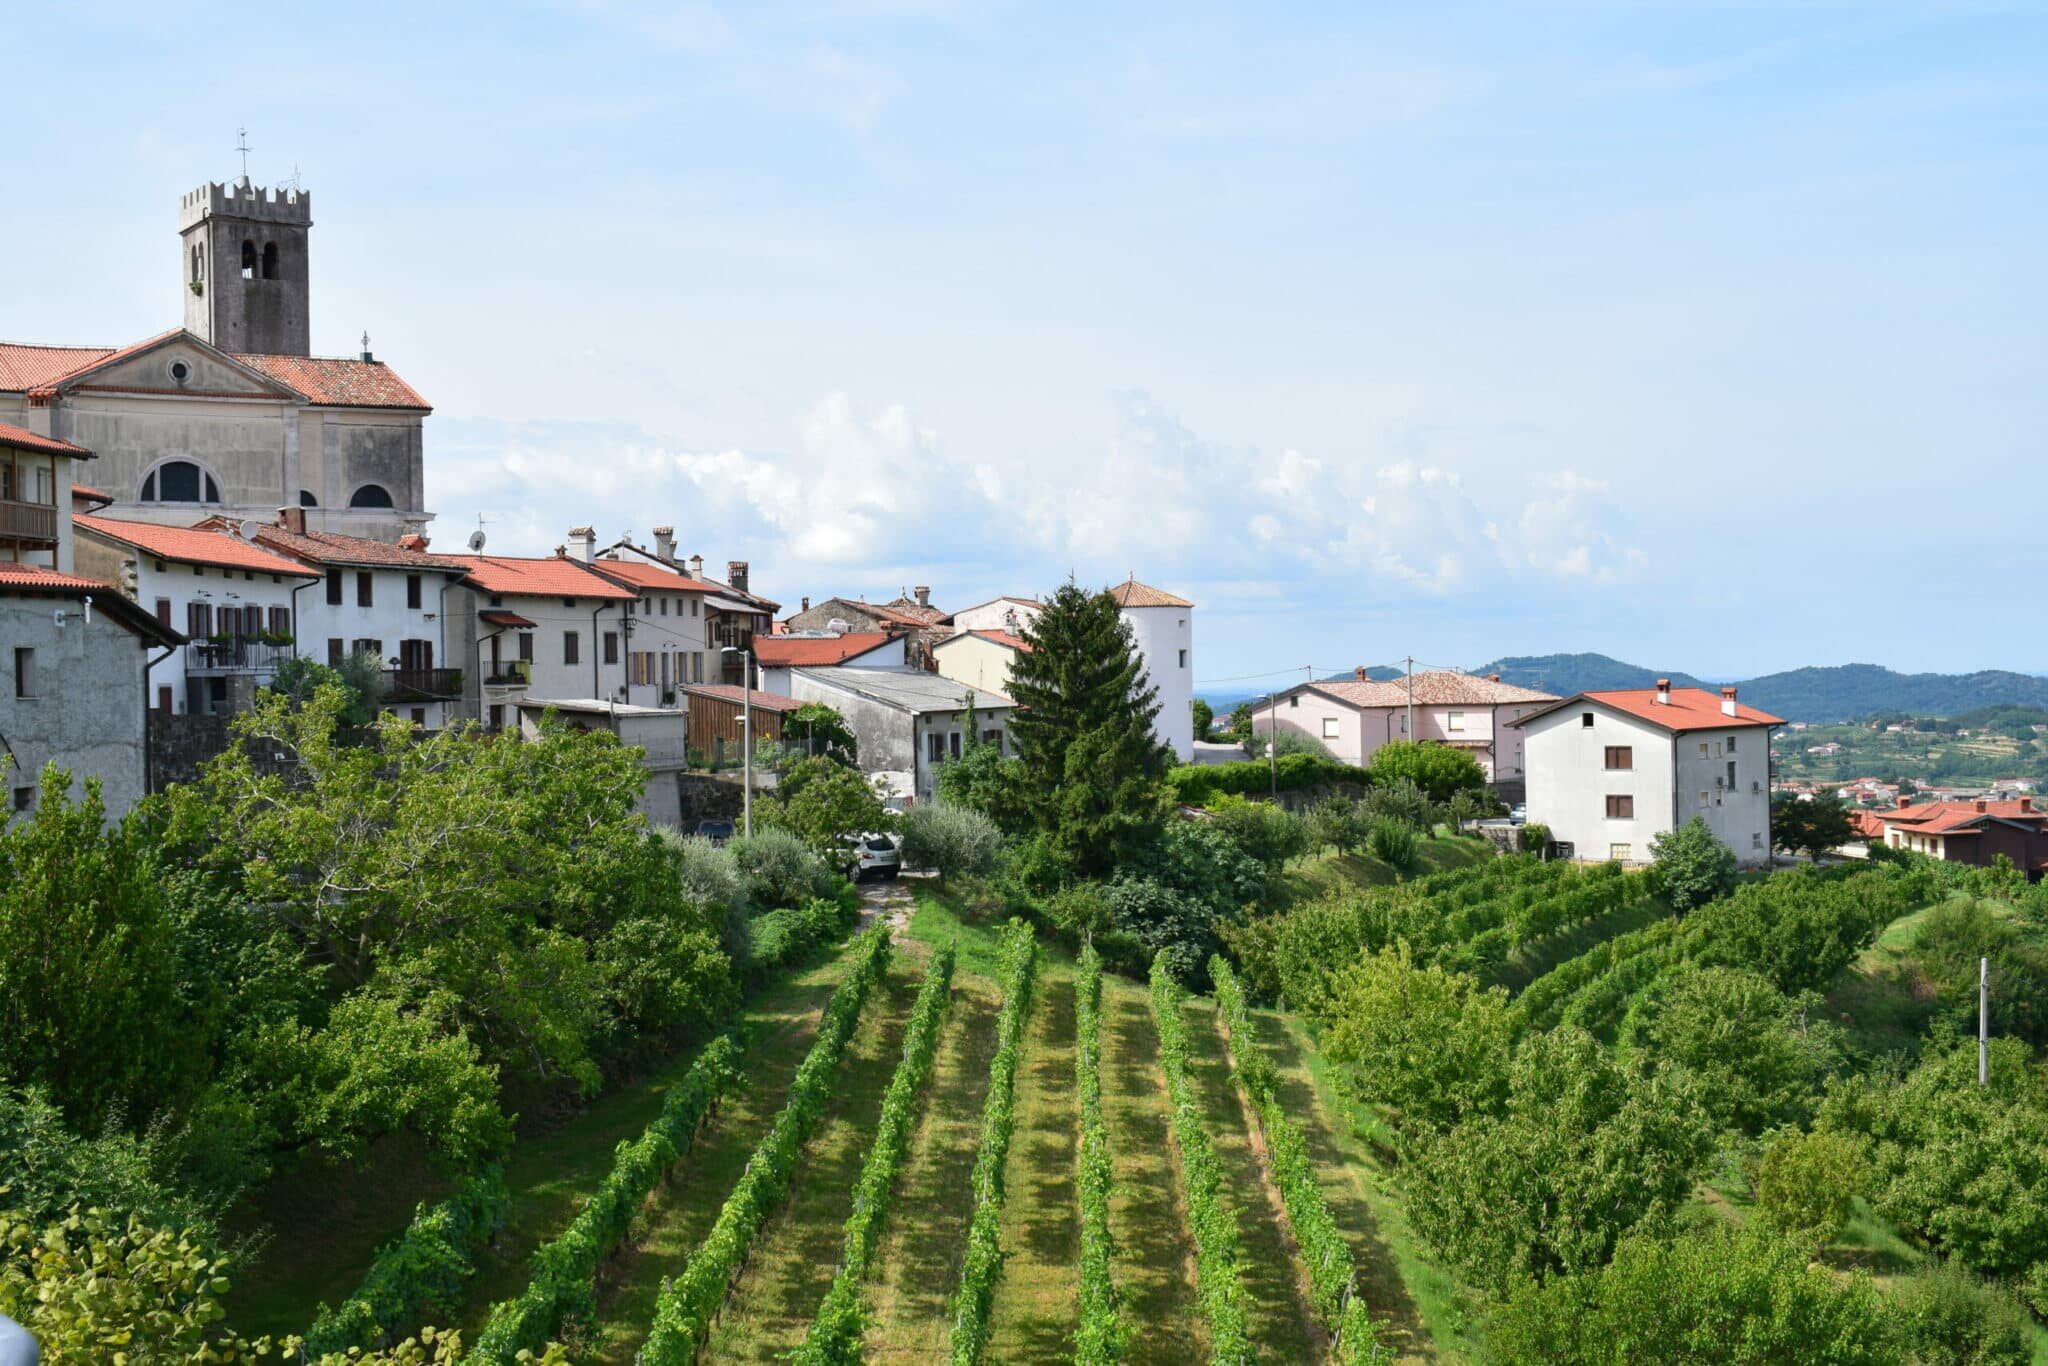 Road trip through Slovenia: our travel route and highlights